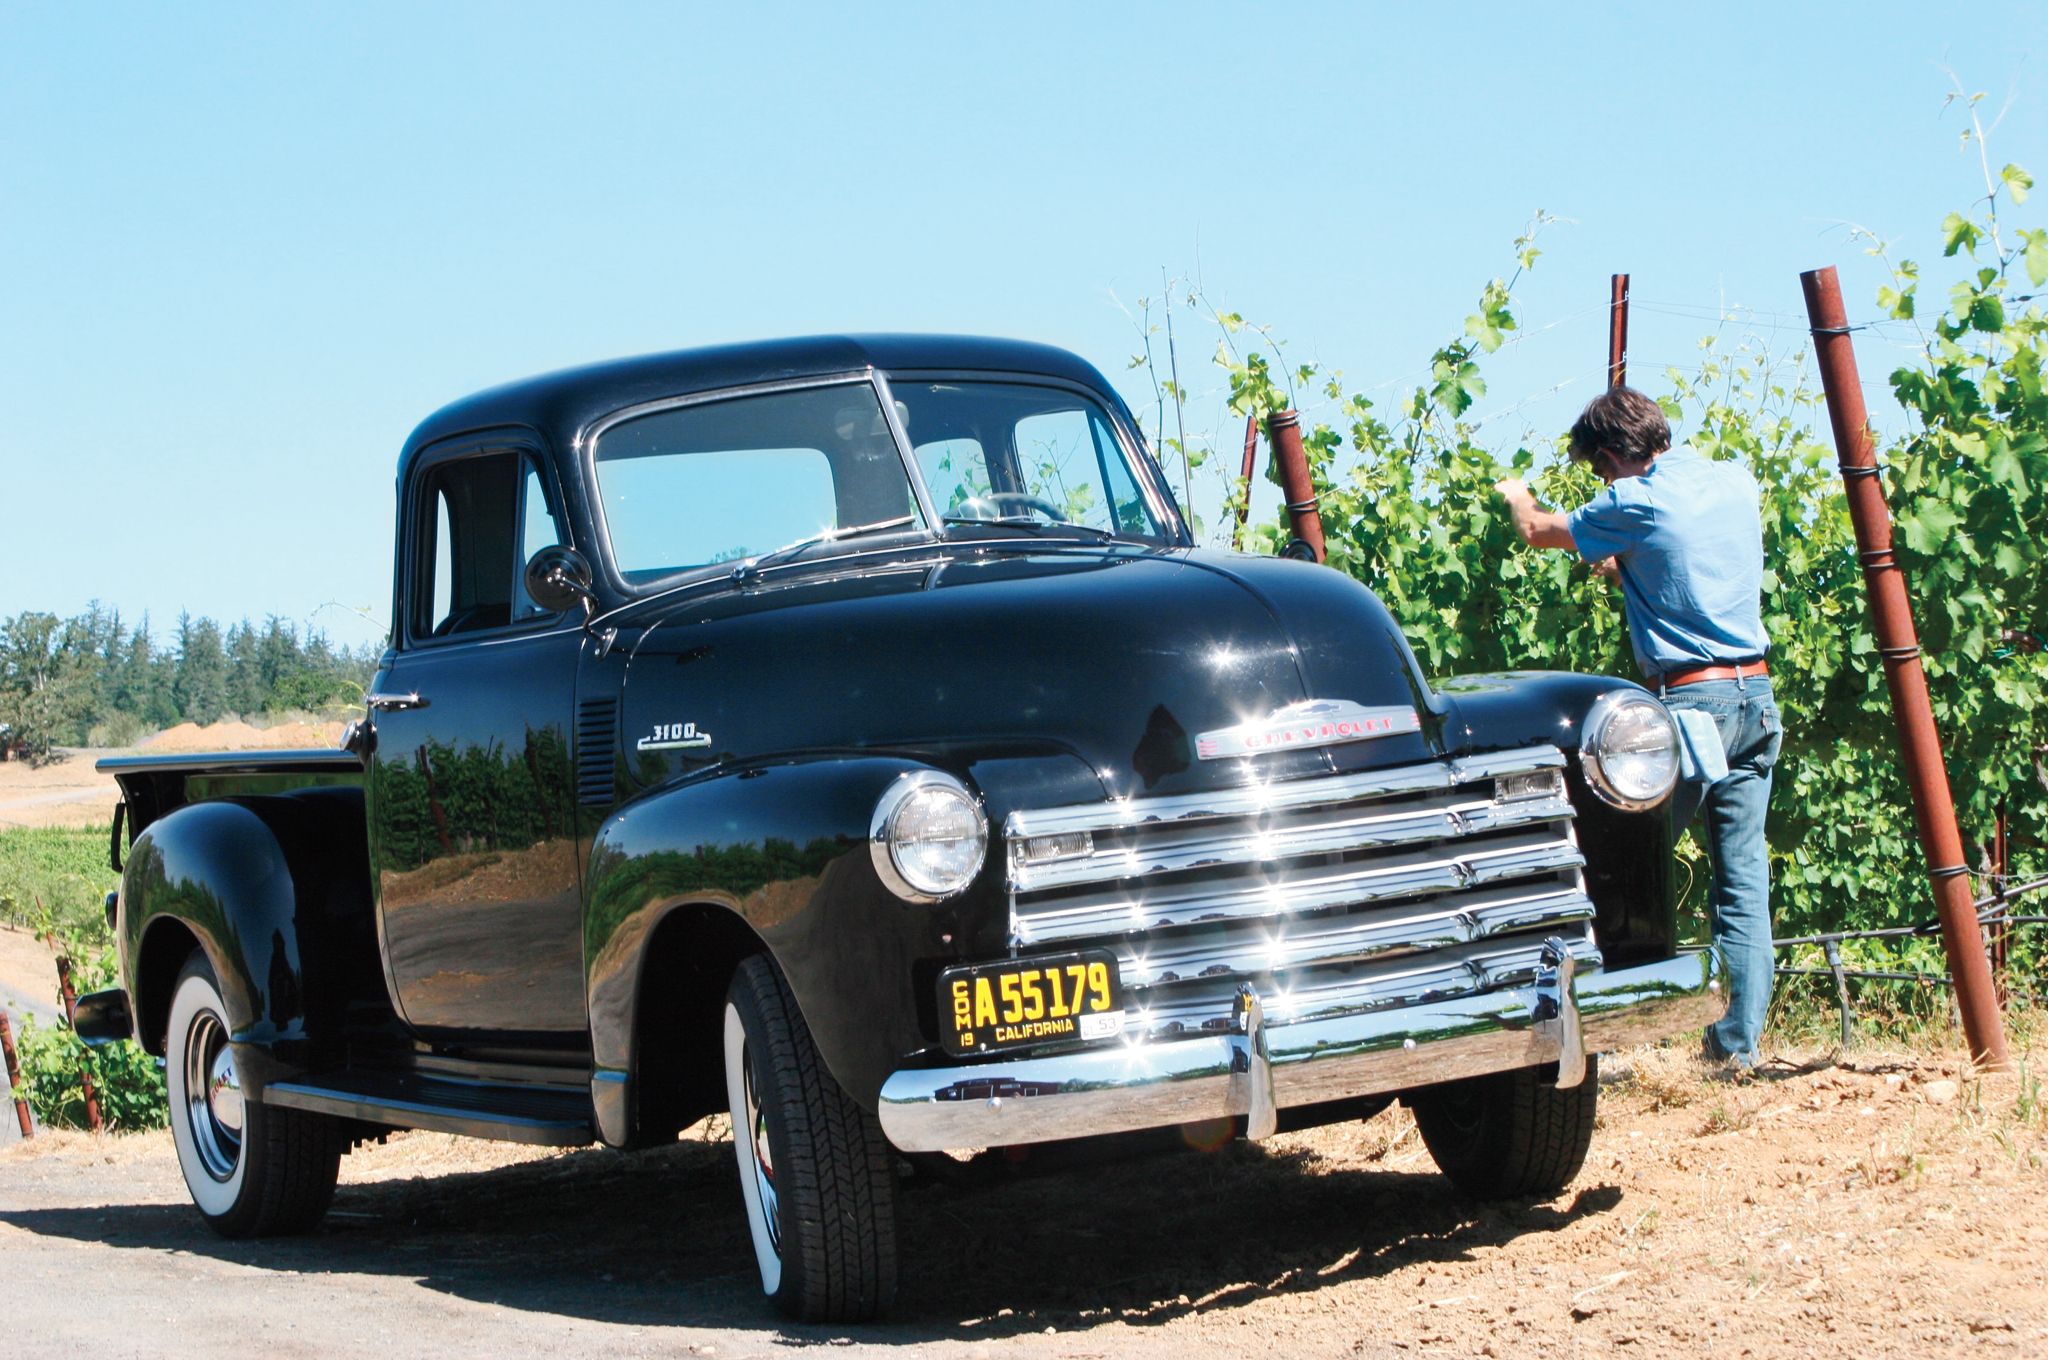 Old Trucks And Tractors In California Wine Country - Travel